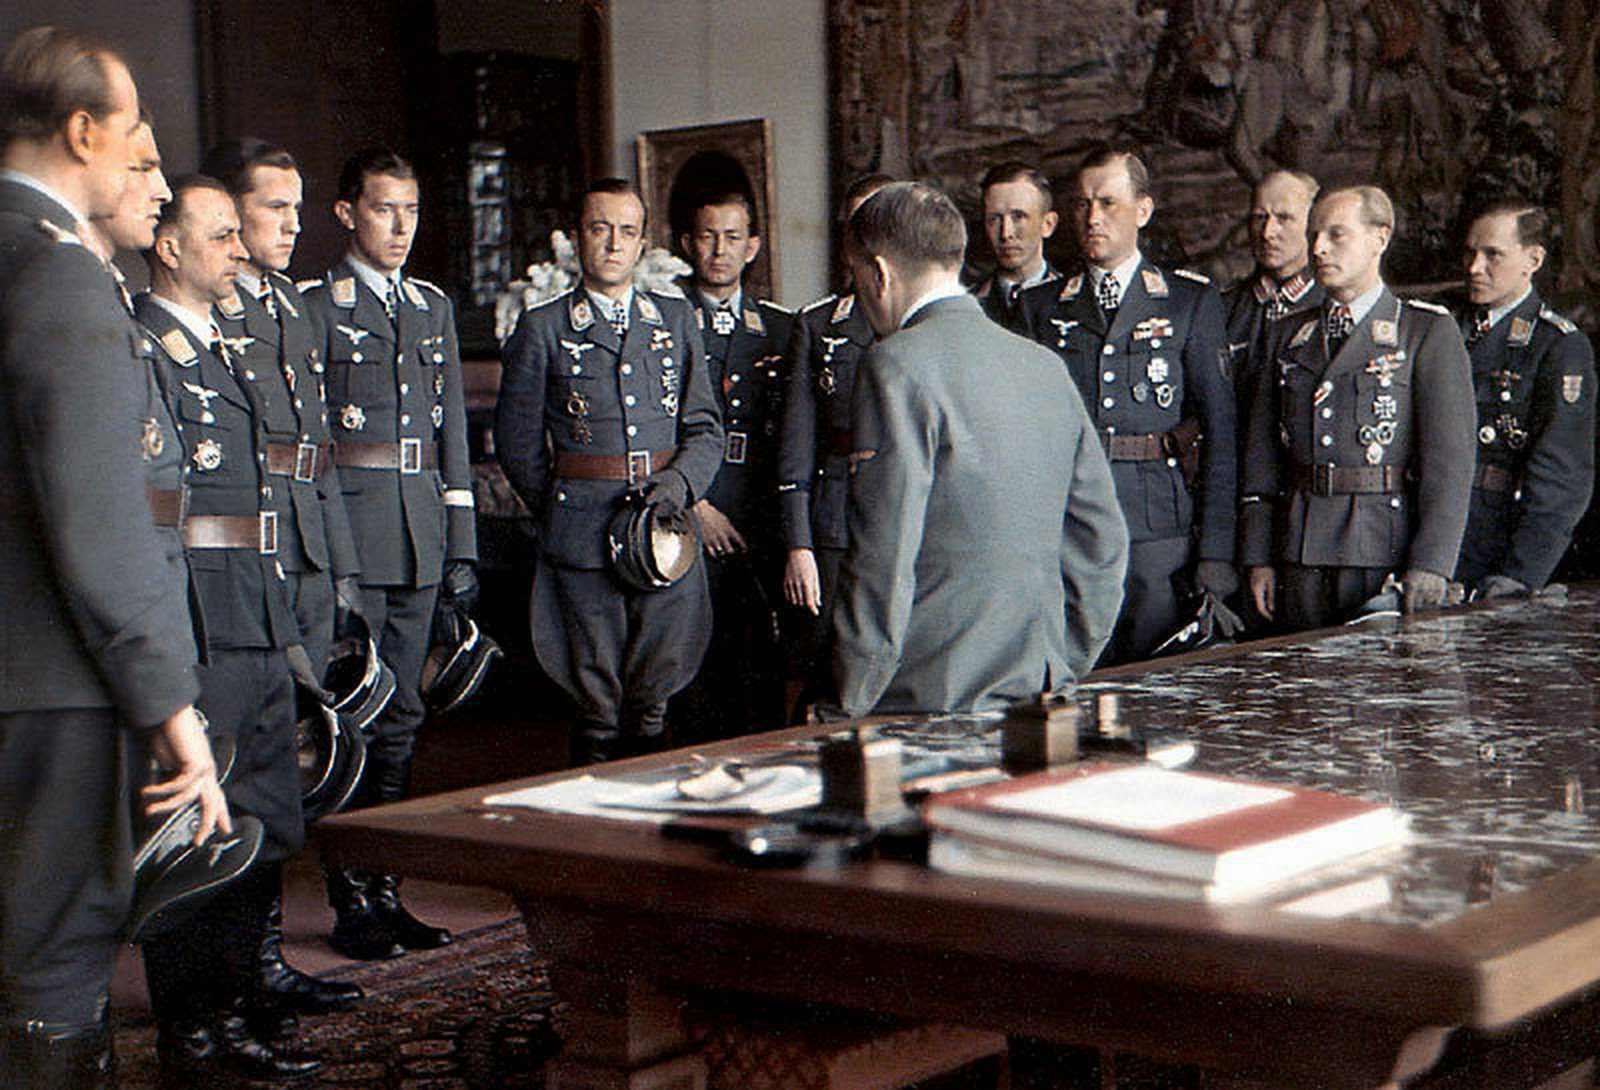 German "Flying aces" being presented to Hitler.